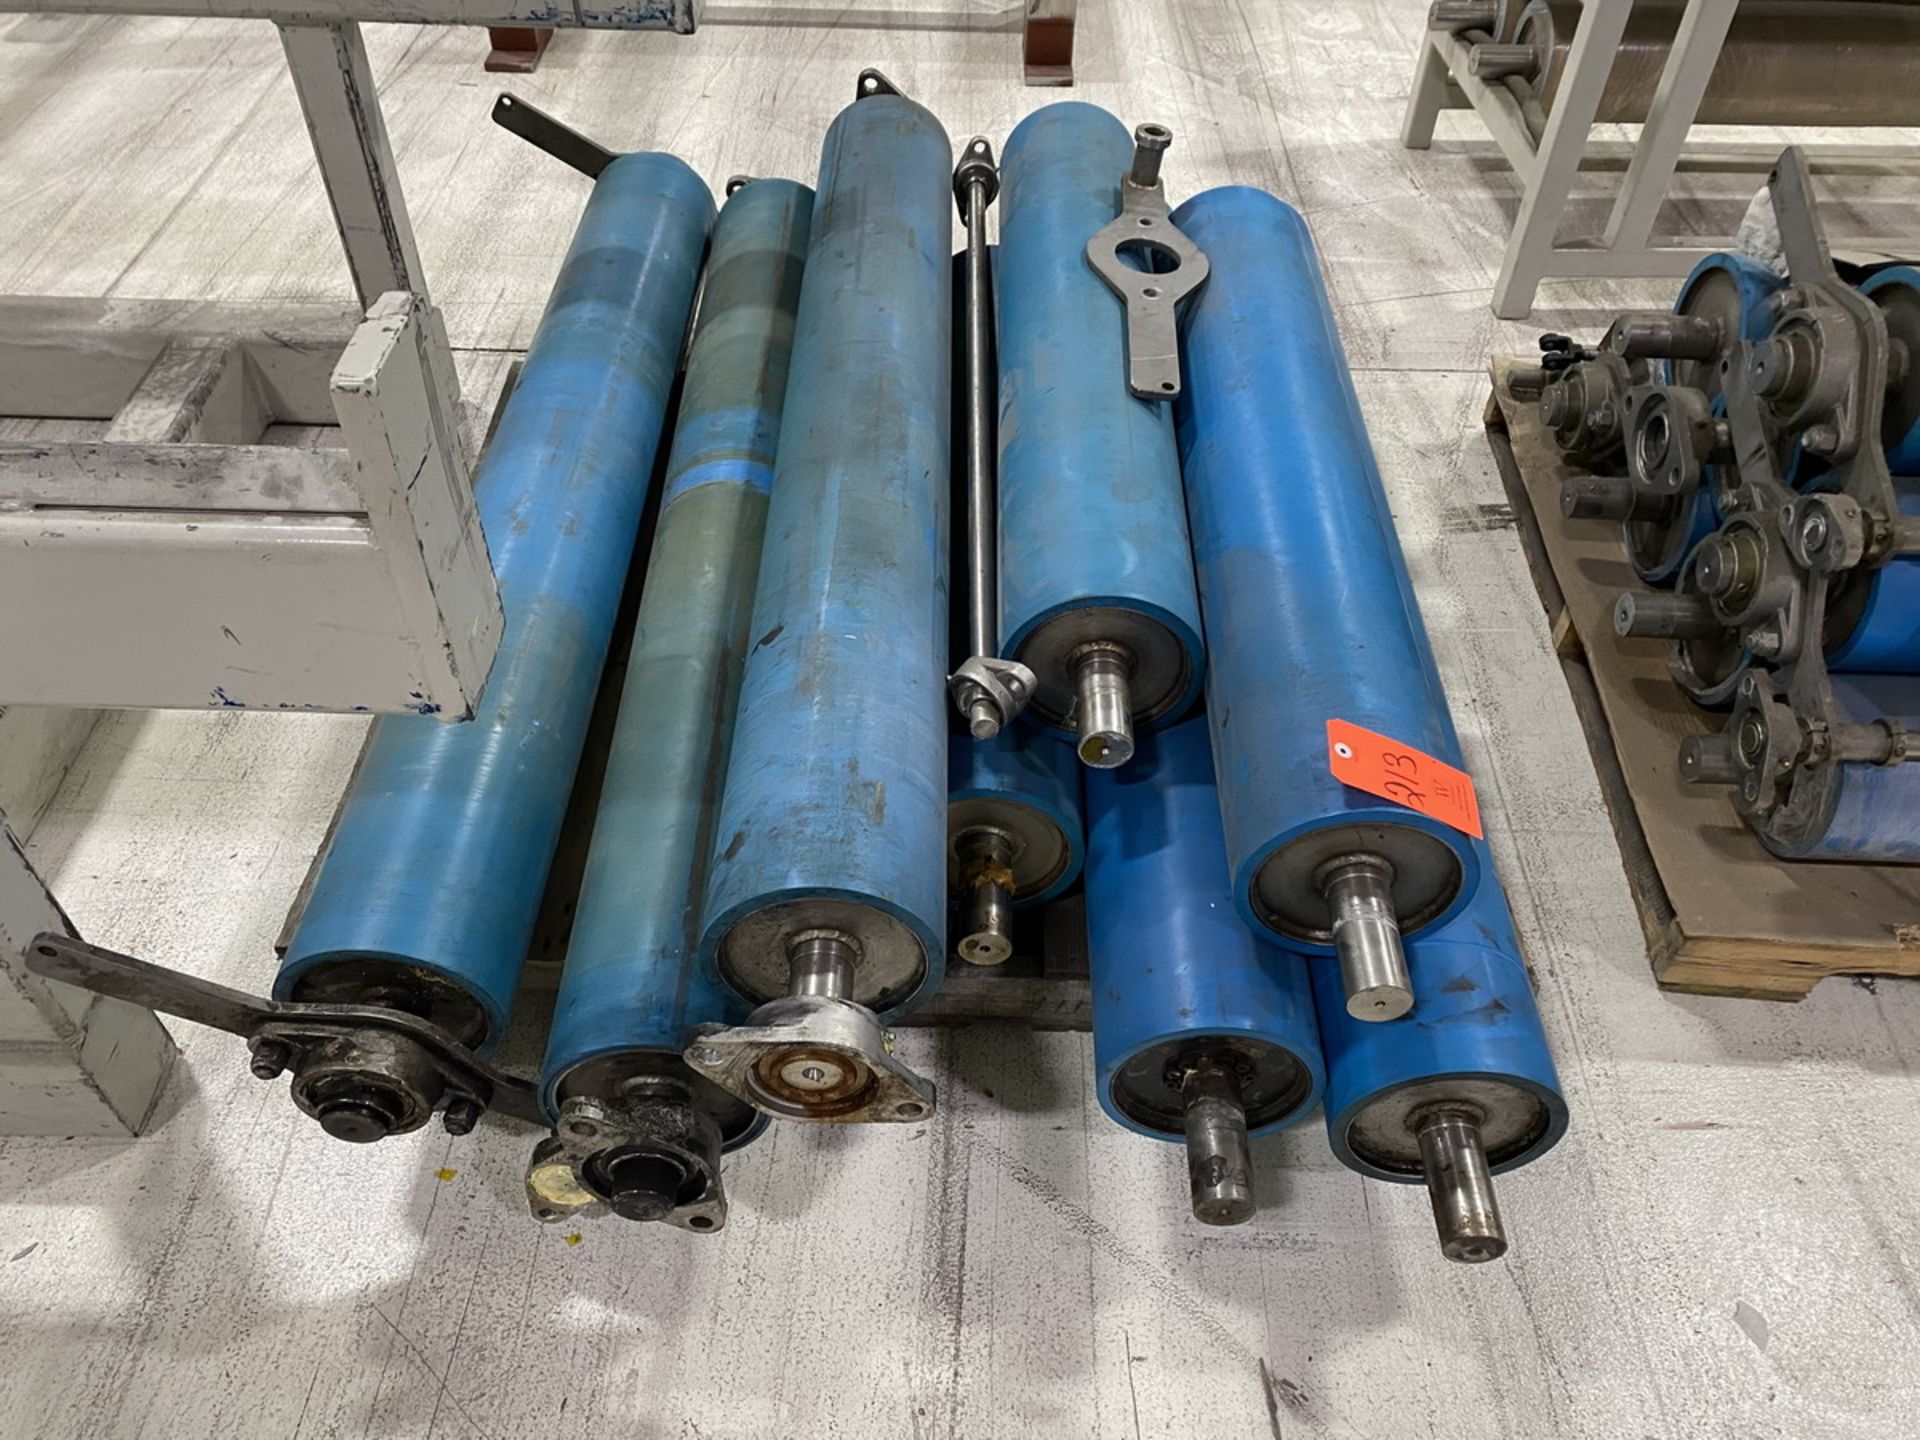 Lot - (8) Silicone Rollers, Ranging from: 8 in. wide x 39 in. long, to 8 in. wide x 56 in. long - Image 2 of 2